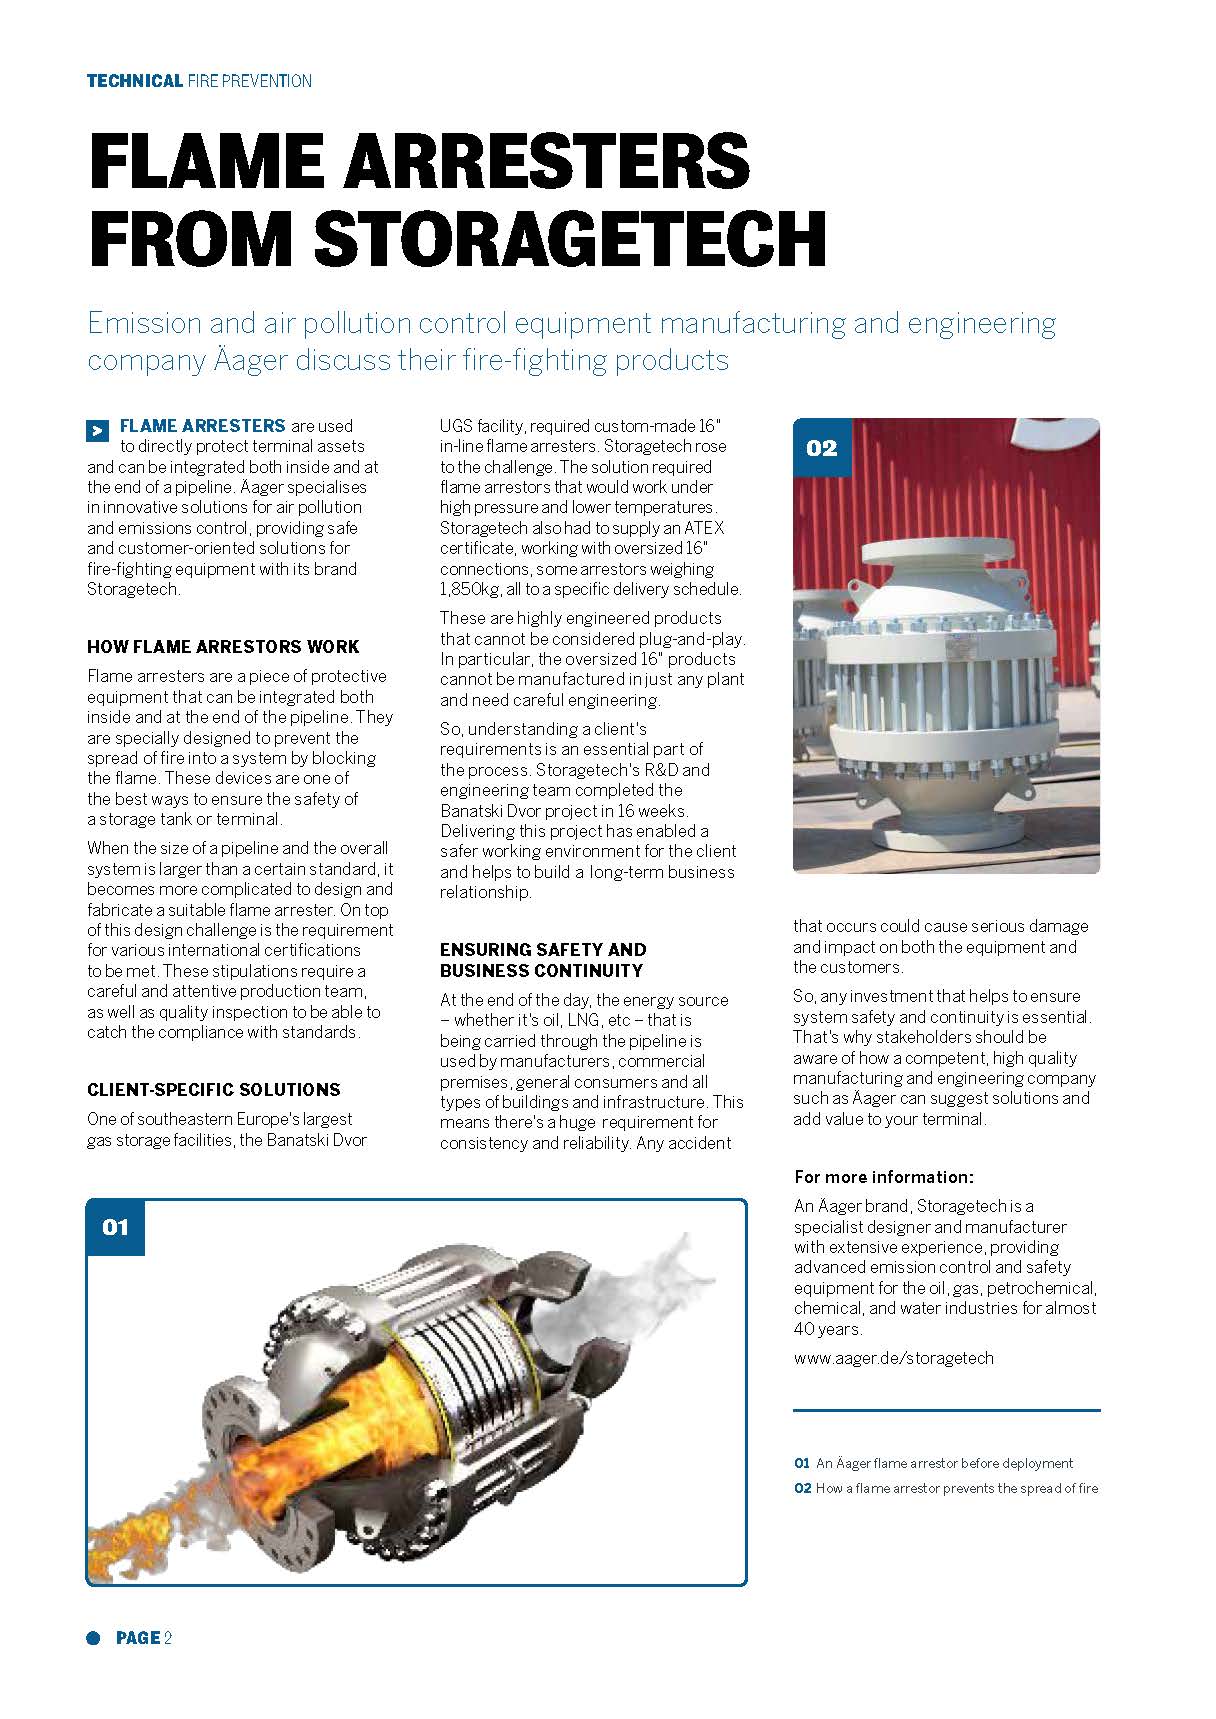 Customer-Oriented Flame Arresters from Storagetech – Tank Storage Magazine Article 65